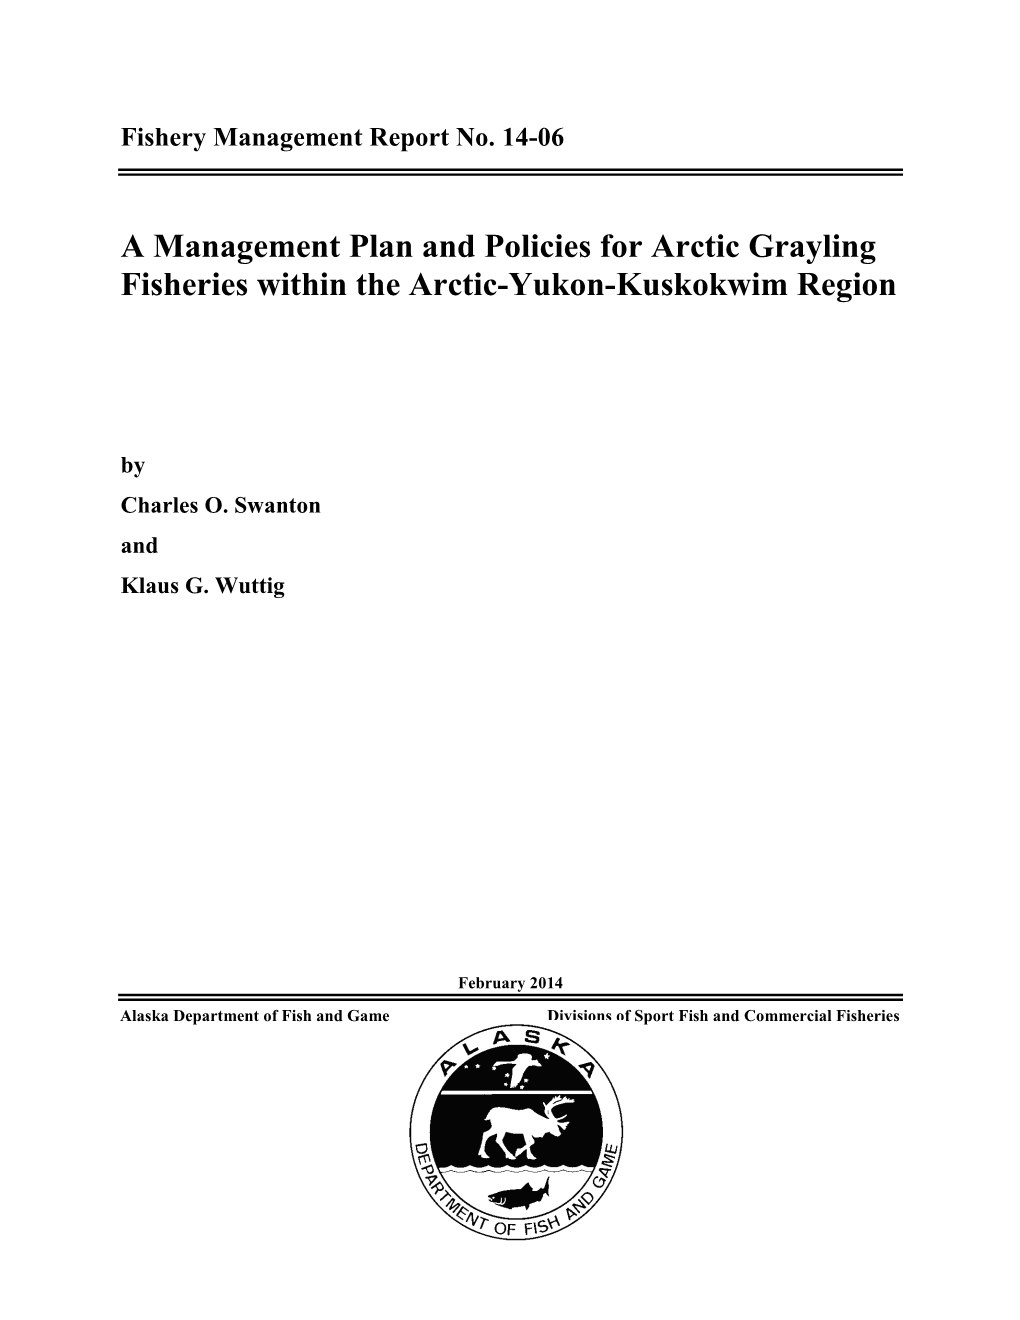 A Management Plan and Policies for Arctic Grayling Fisheries Within the Arctic-Yukon-Kuskokwim Region